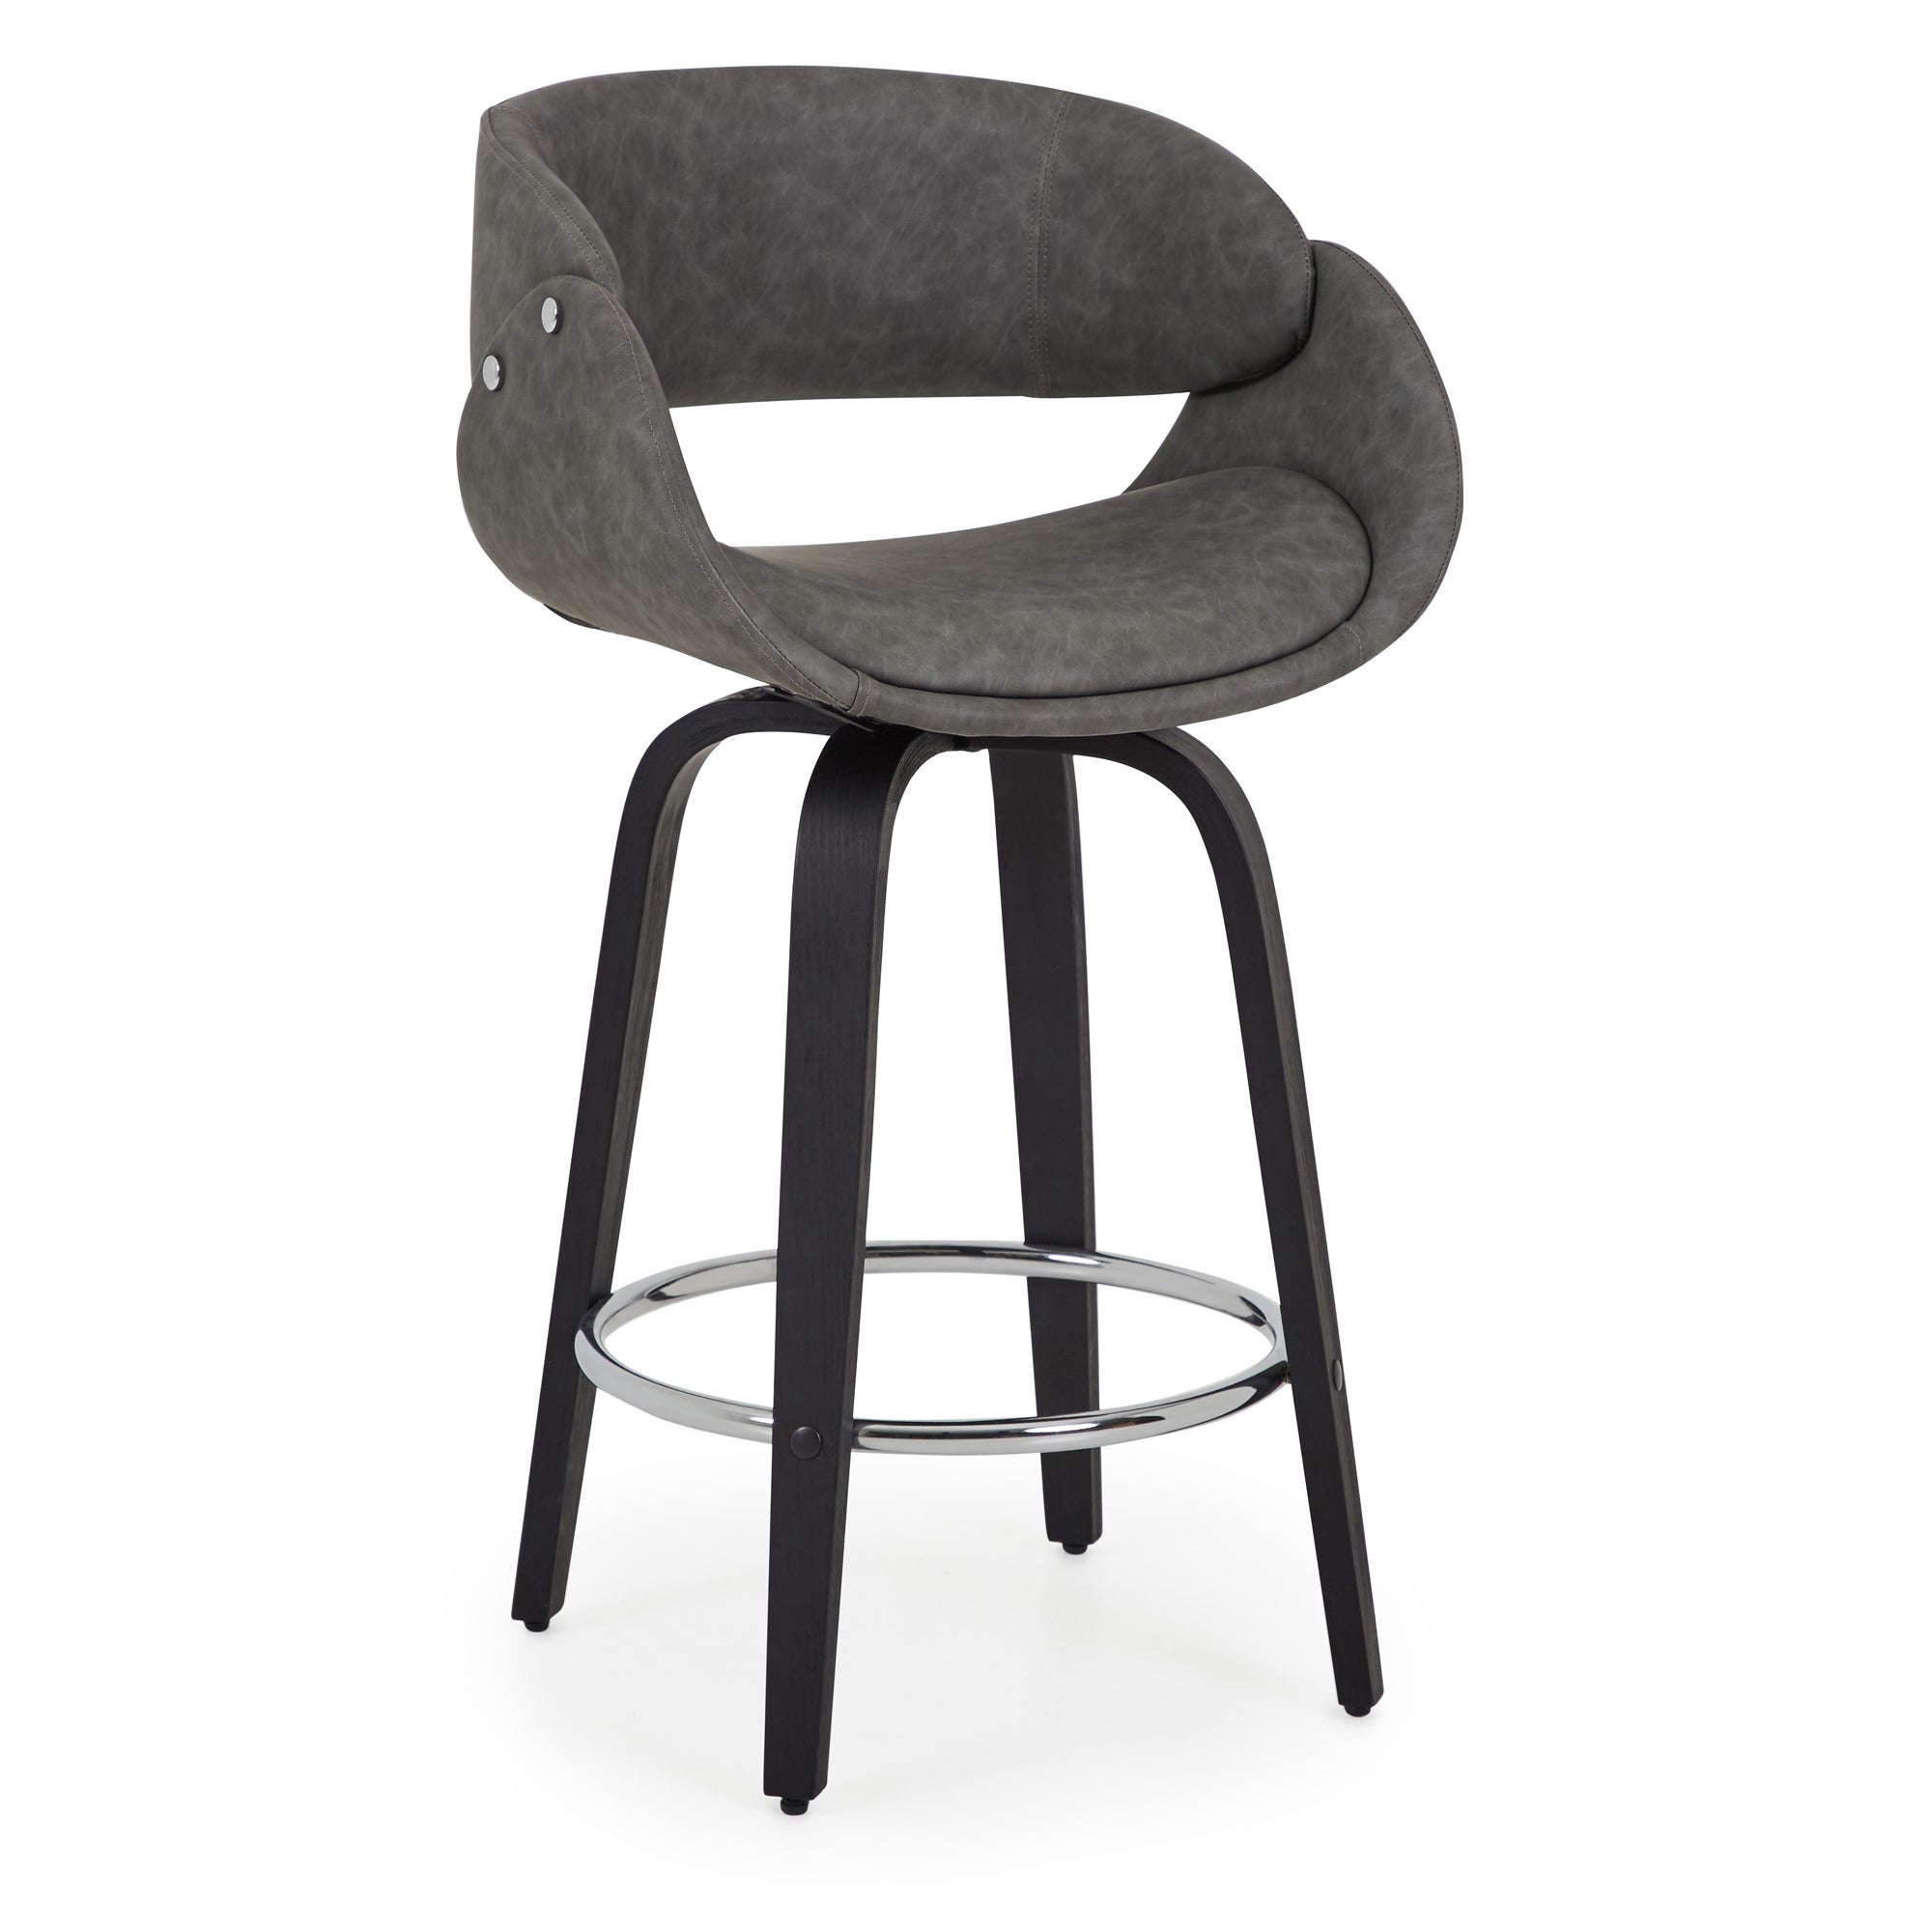 Torcello Bar Height Stool, Faux Leather Grey